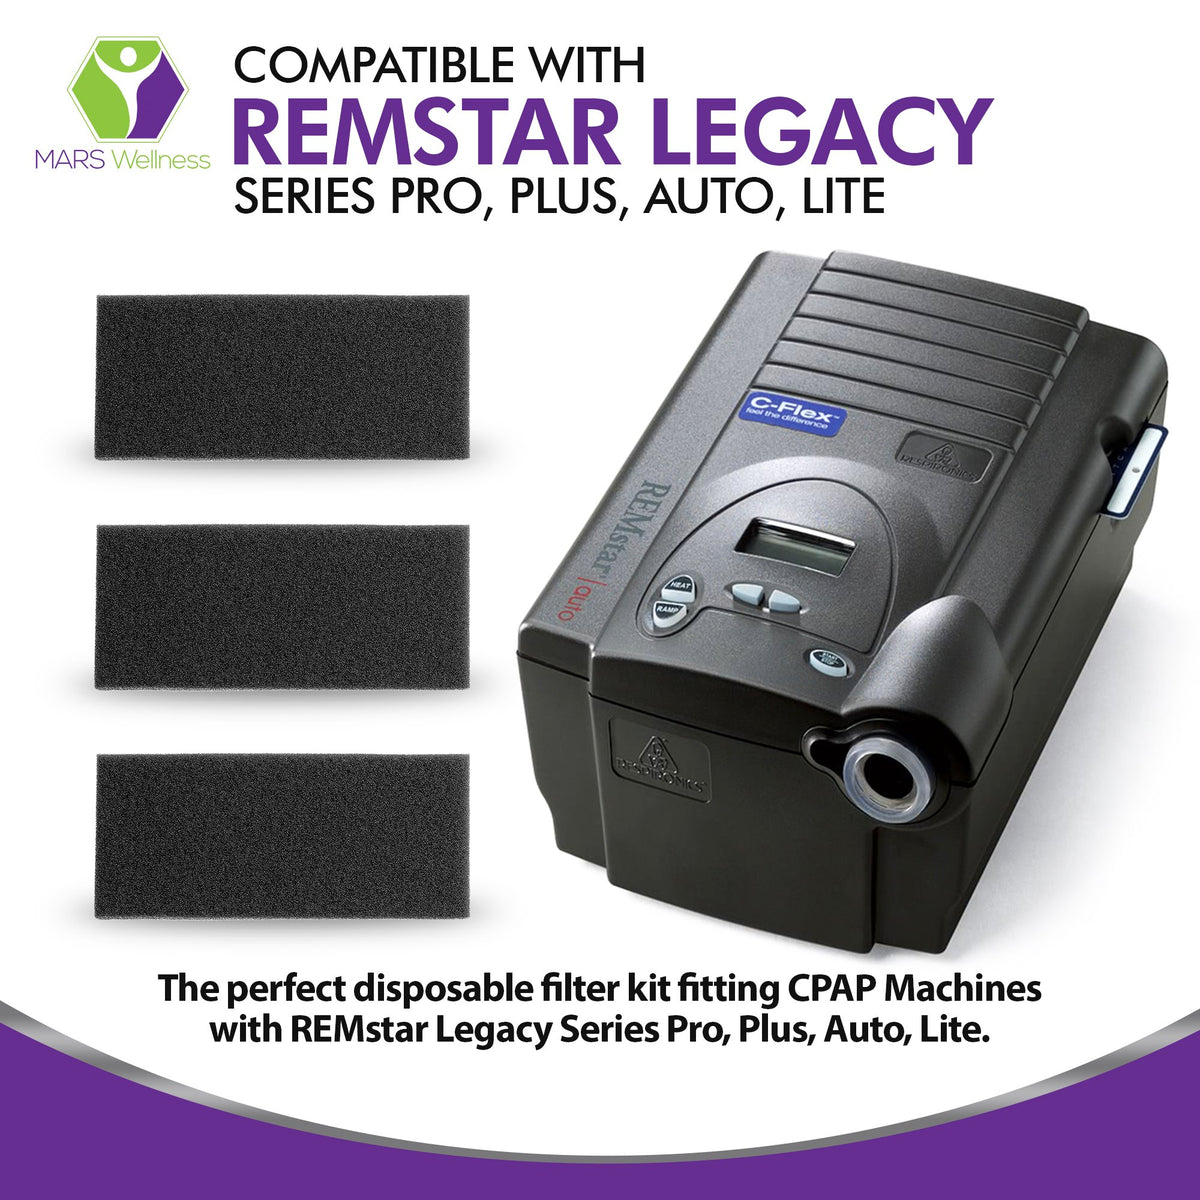 Mars Wellness CPAP Filter Kit - Compatible with REMstar Legacy Series Pro, Plus, Auto, Lite CPAP Machines - Made in The USA